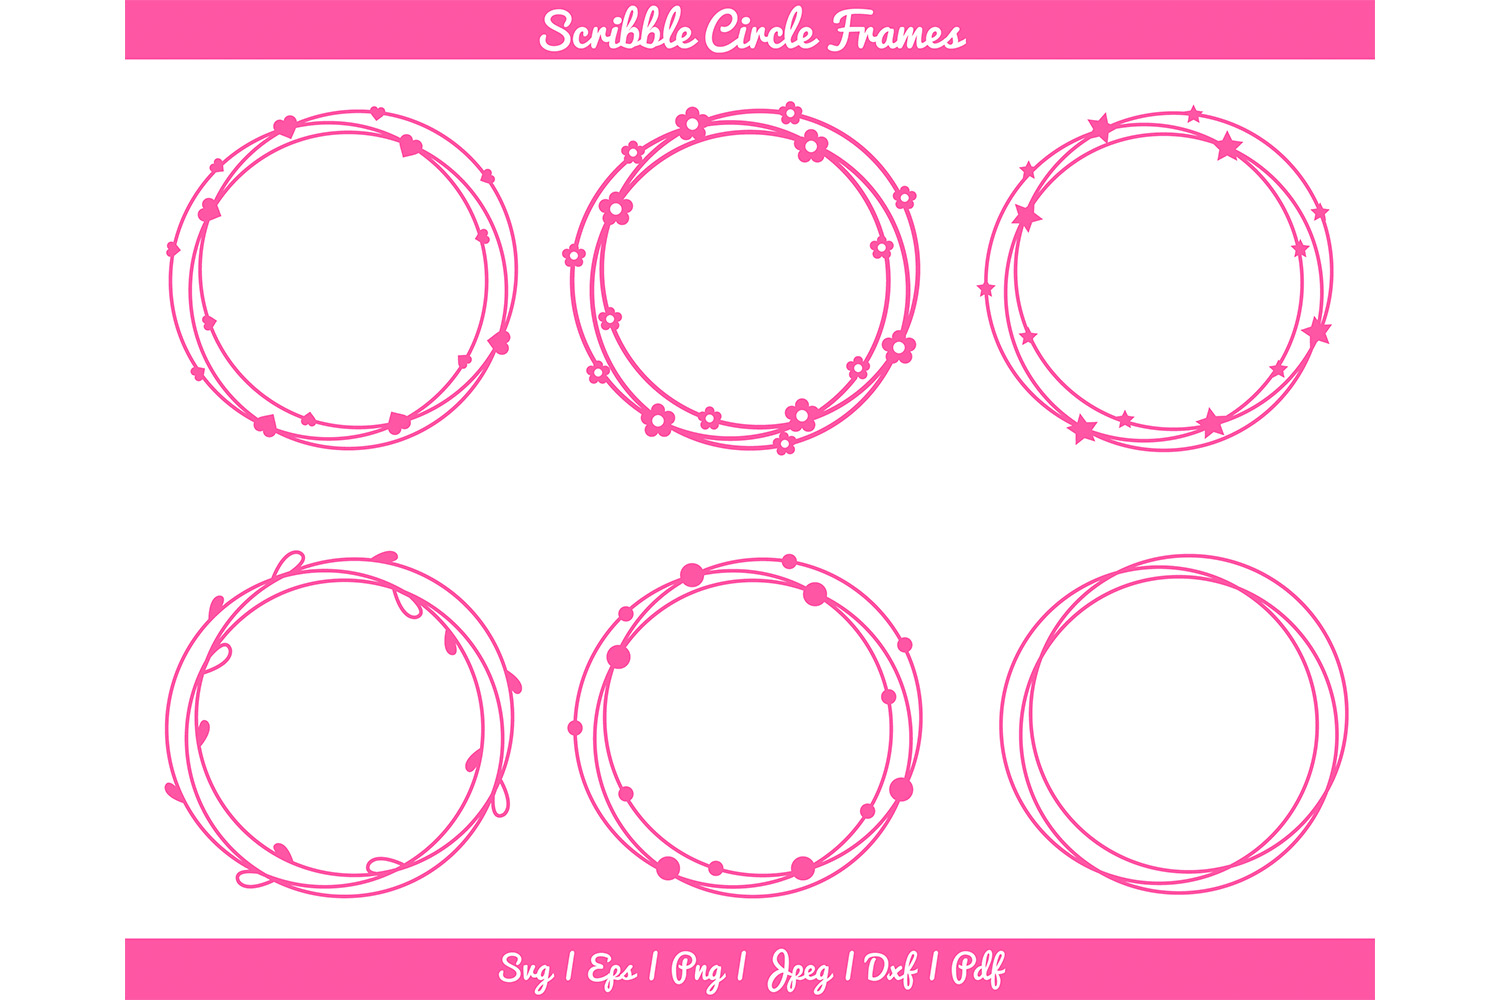 Download Silhouette Monogram Frame Cricut Overlapping Border Circle Frame Svg Scribble Clipart Doodle Circle Svg Sketch Circle Svg Cut Files Clip Art Art Collectibles